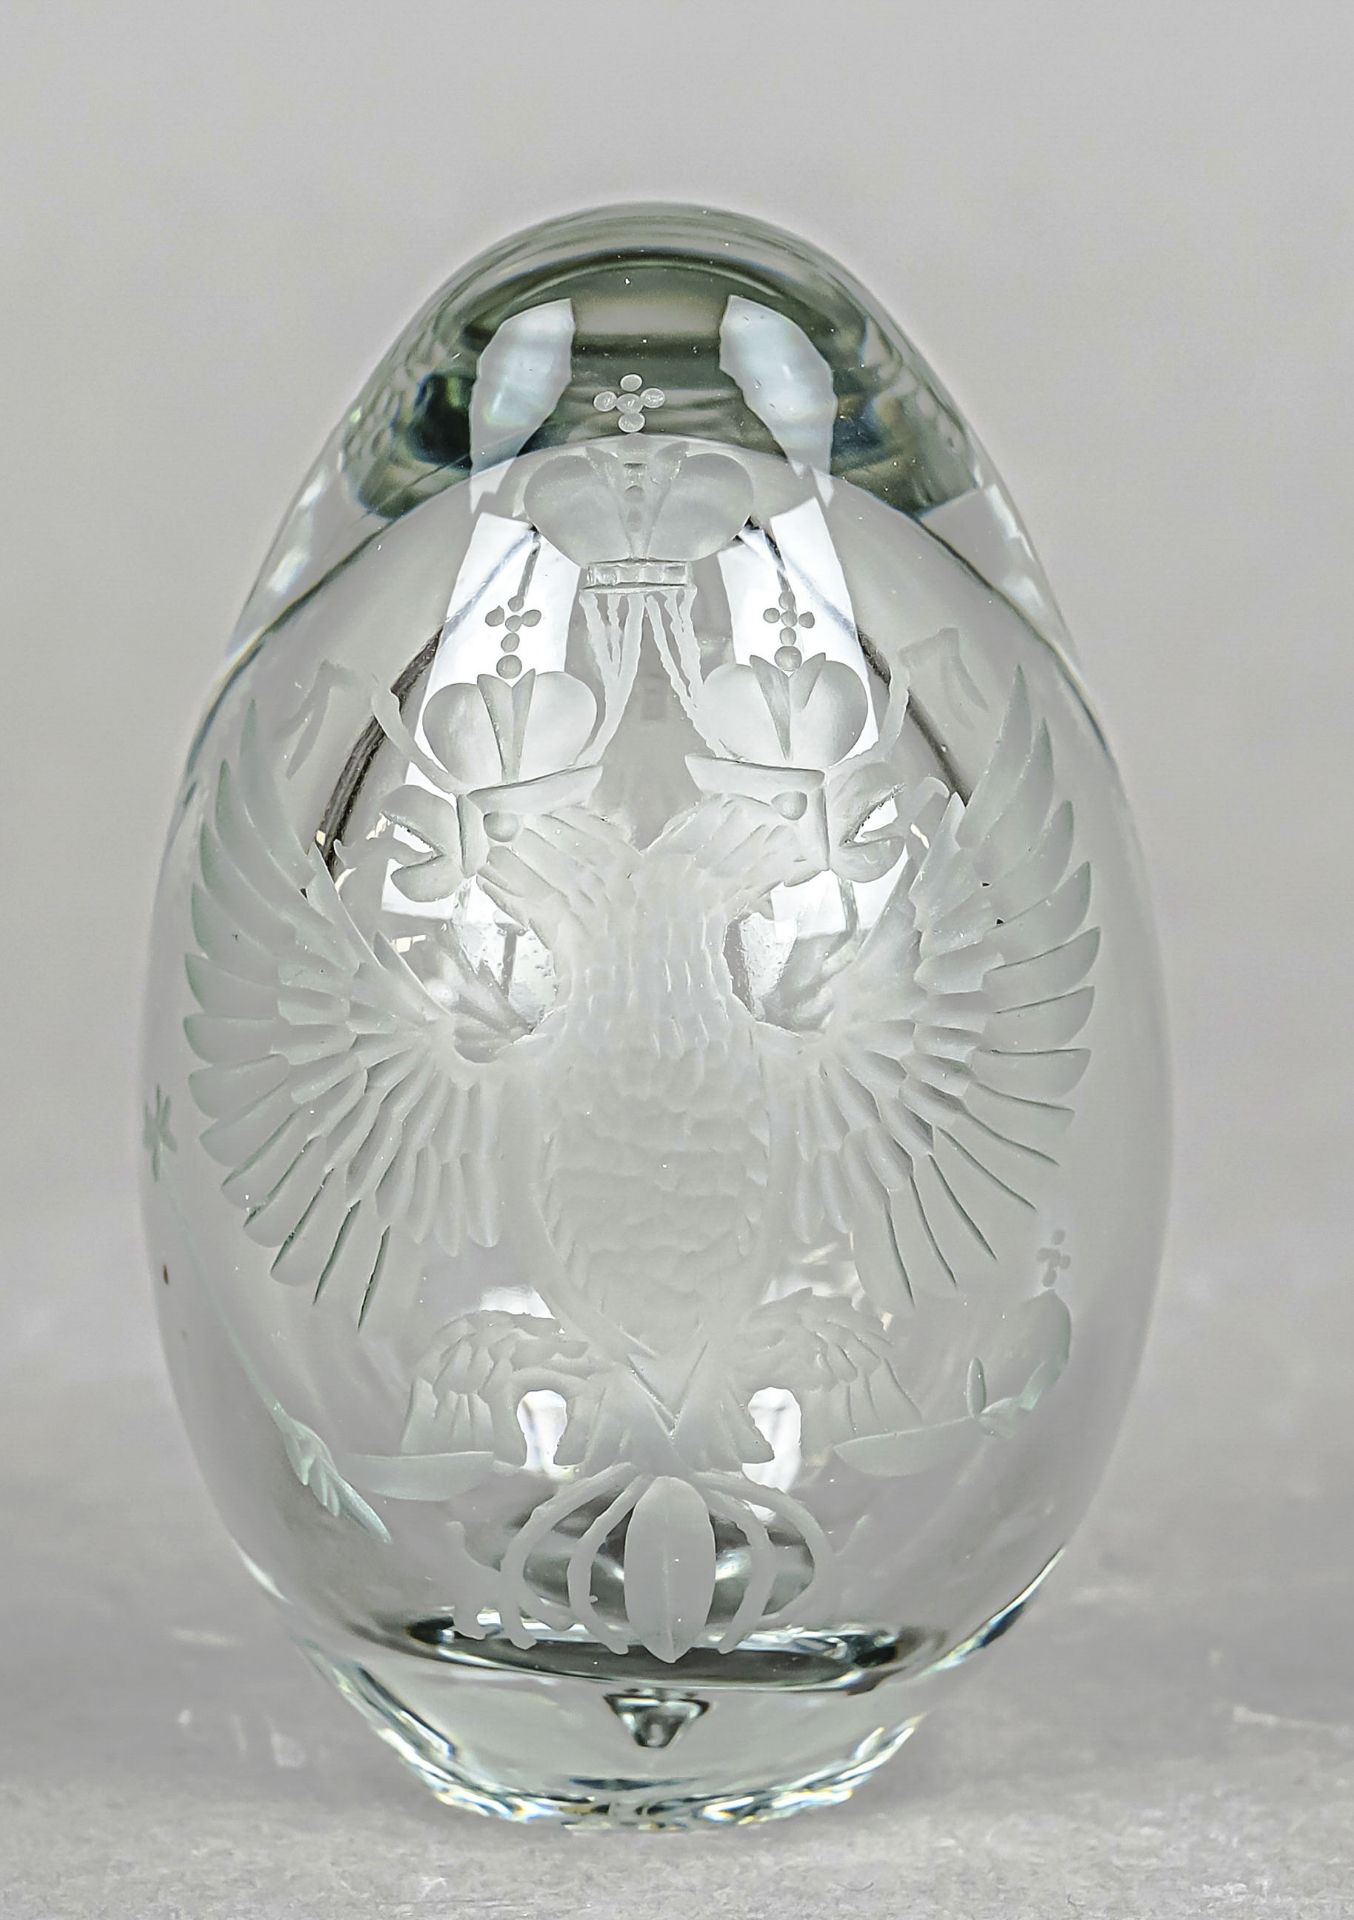 Paperweight, Russia, early 20th century, egg-shaped, clear glass with cut decoration, double